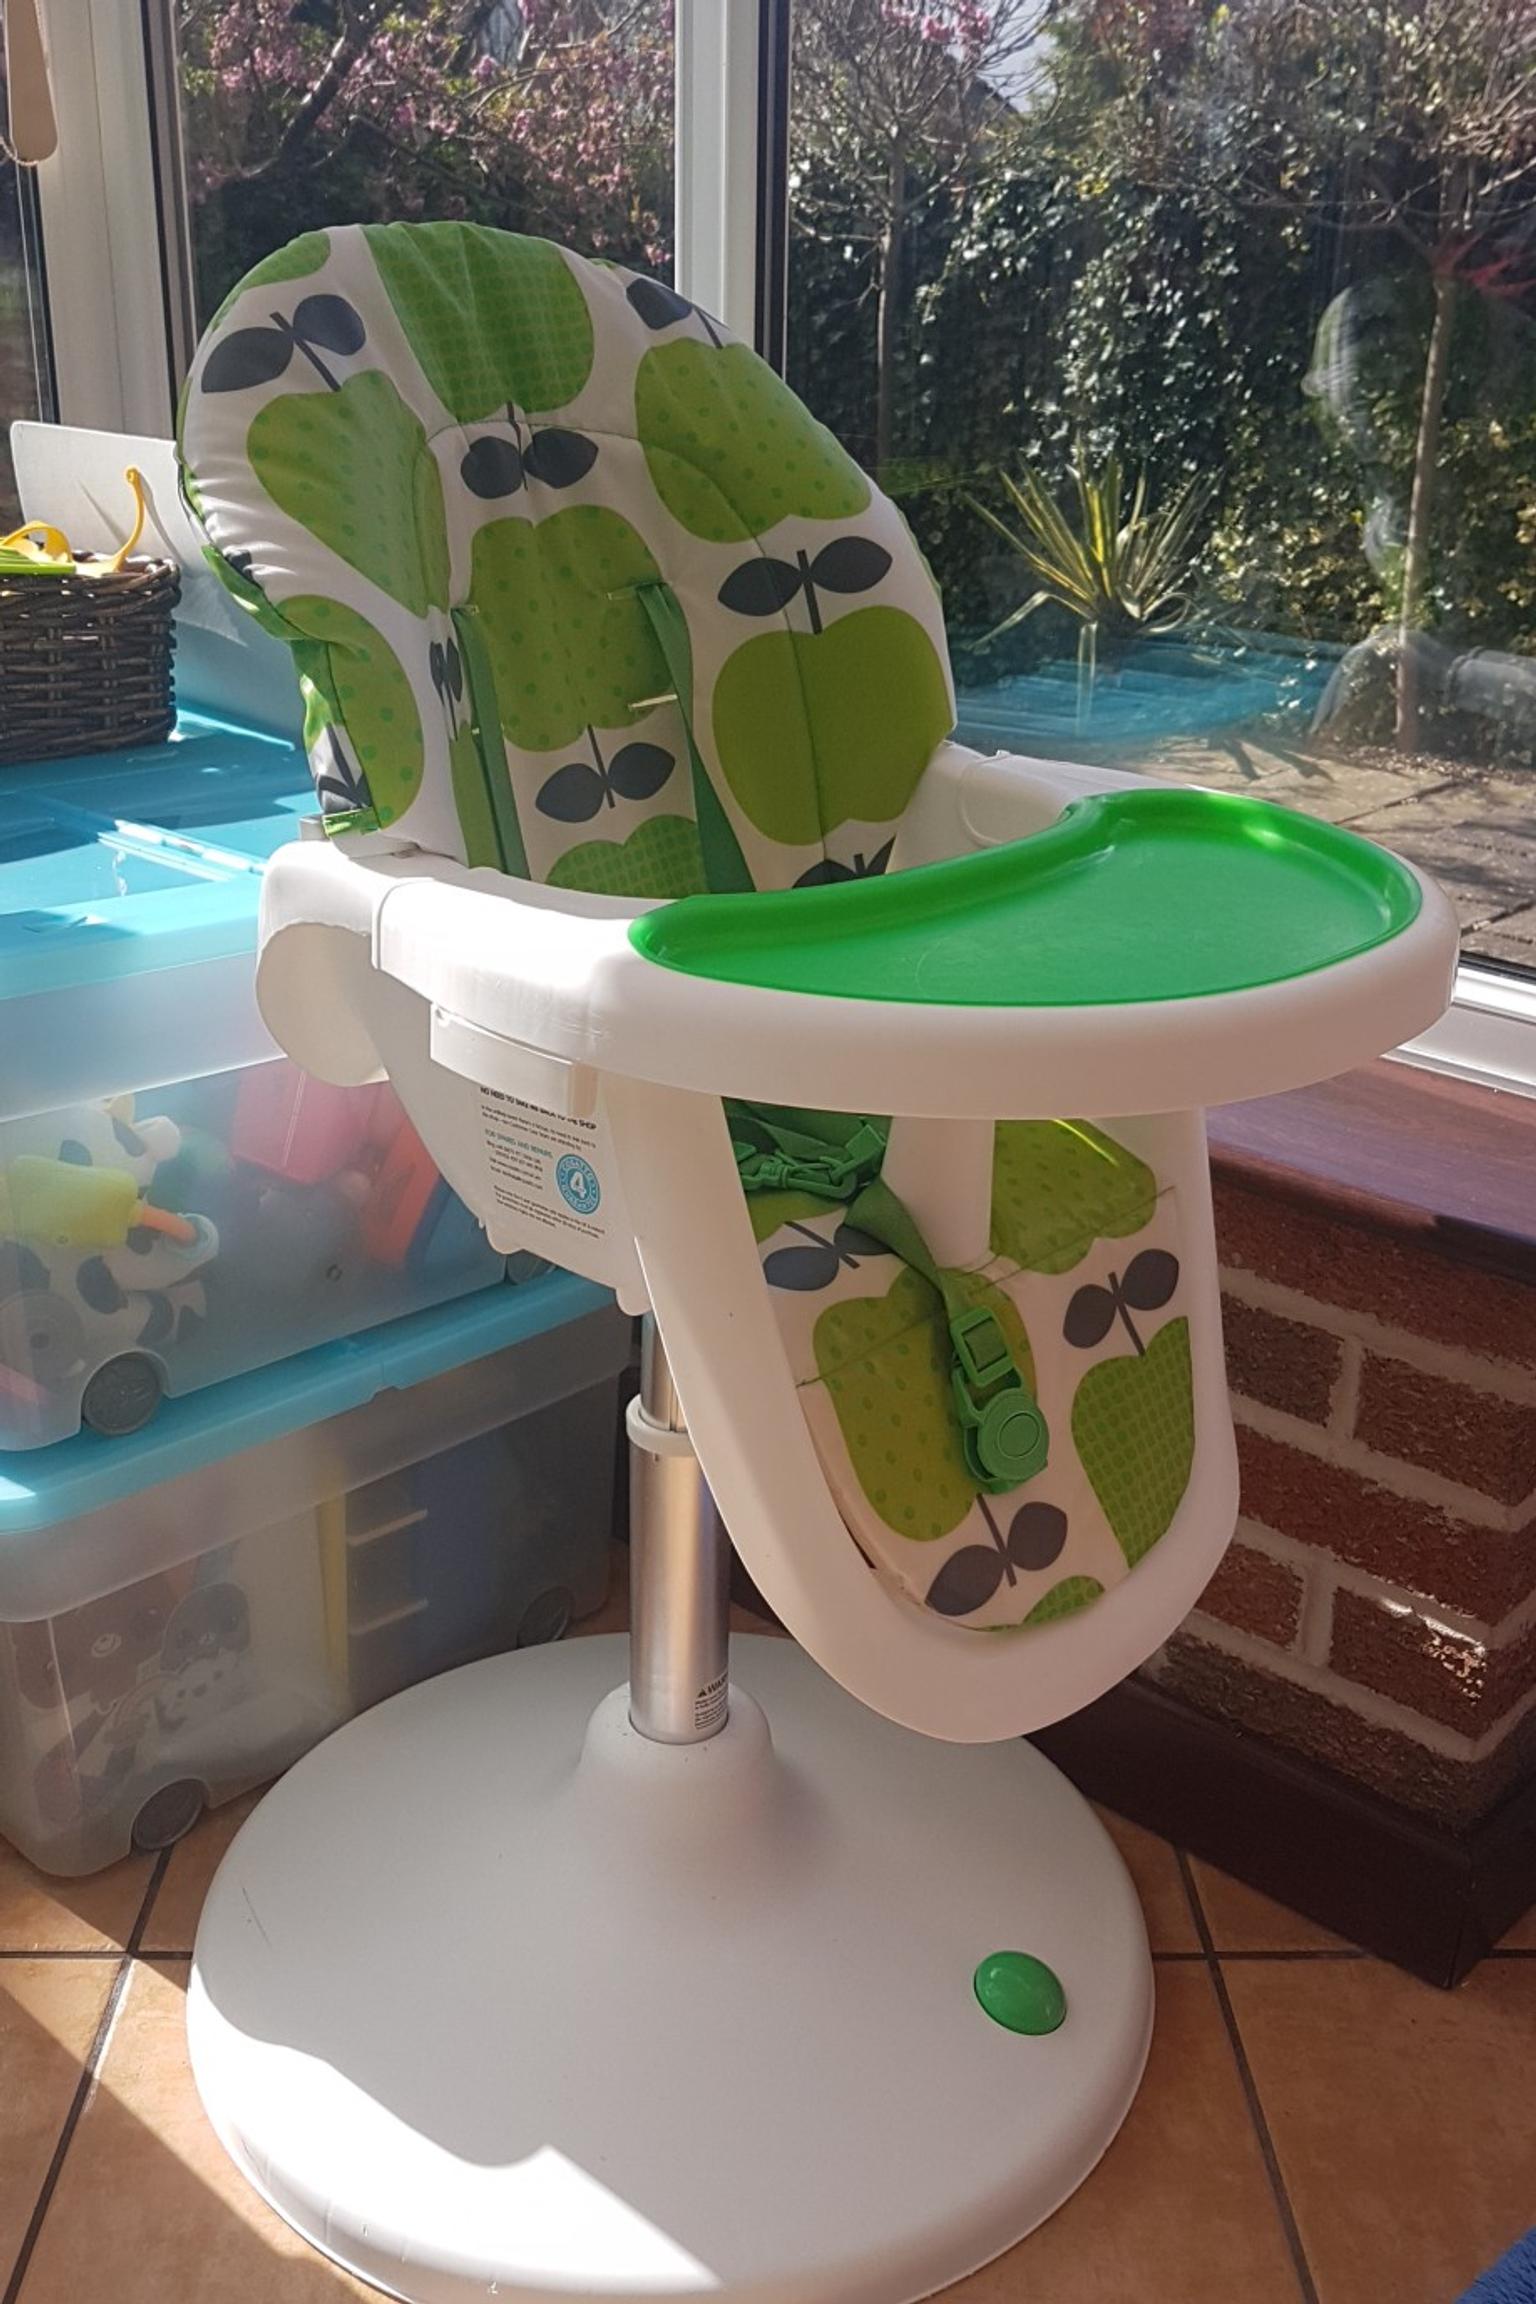 Cosatto 3sixti High Chair In St15 Stone For 10 00 For Sale Shpock